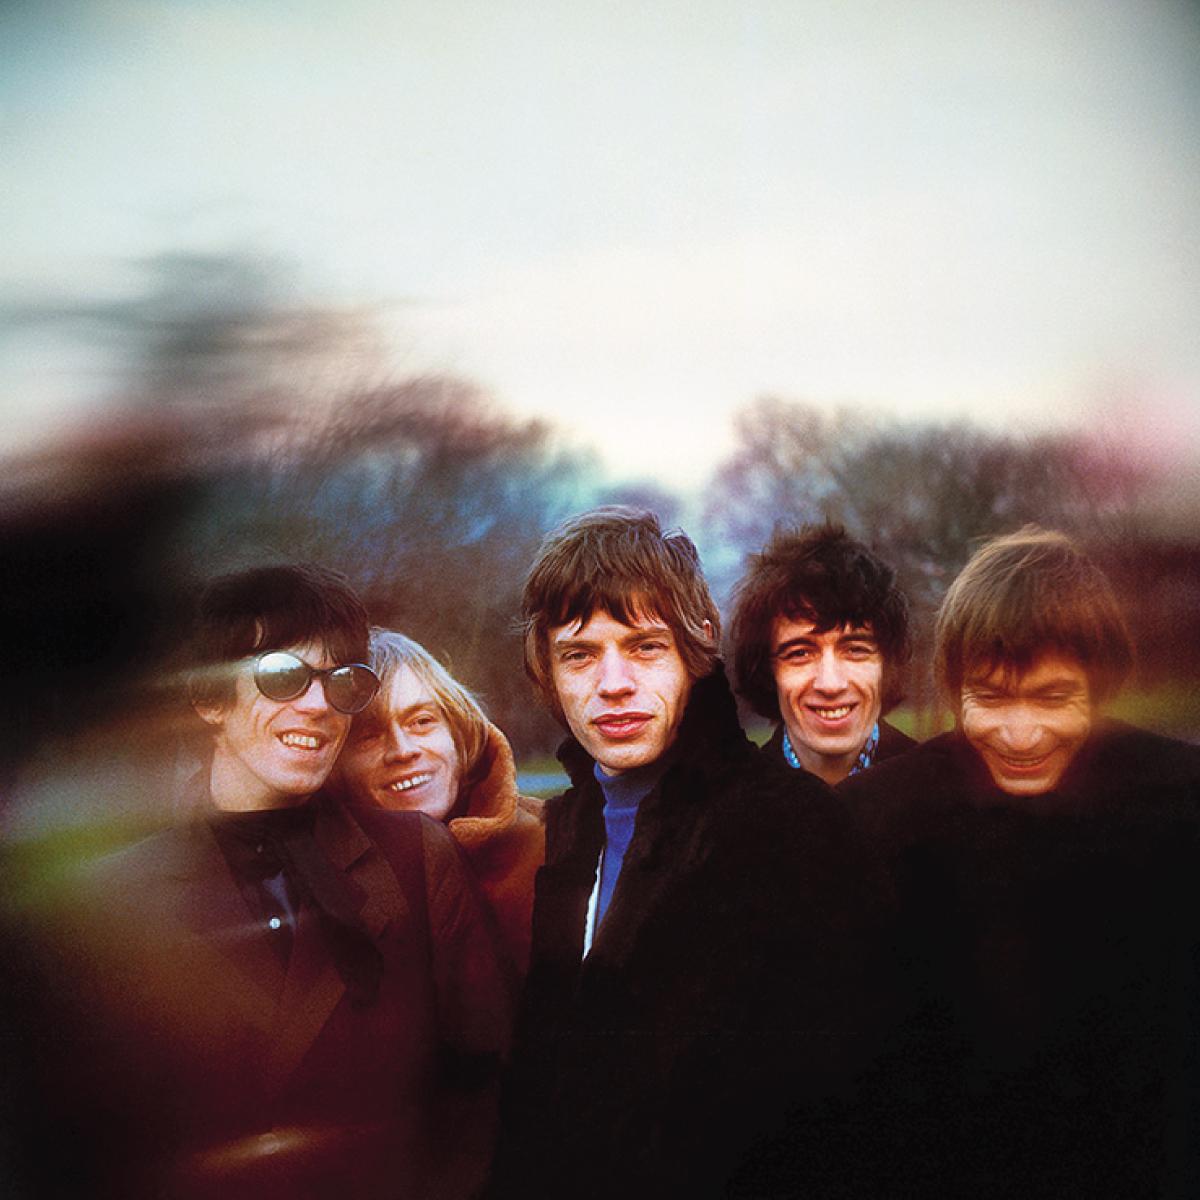 The Rolling Stones "Between The Buttons" by Gered Mankowitz